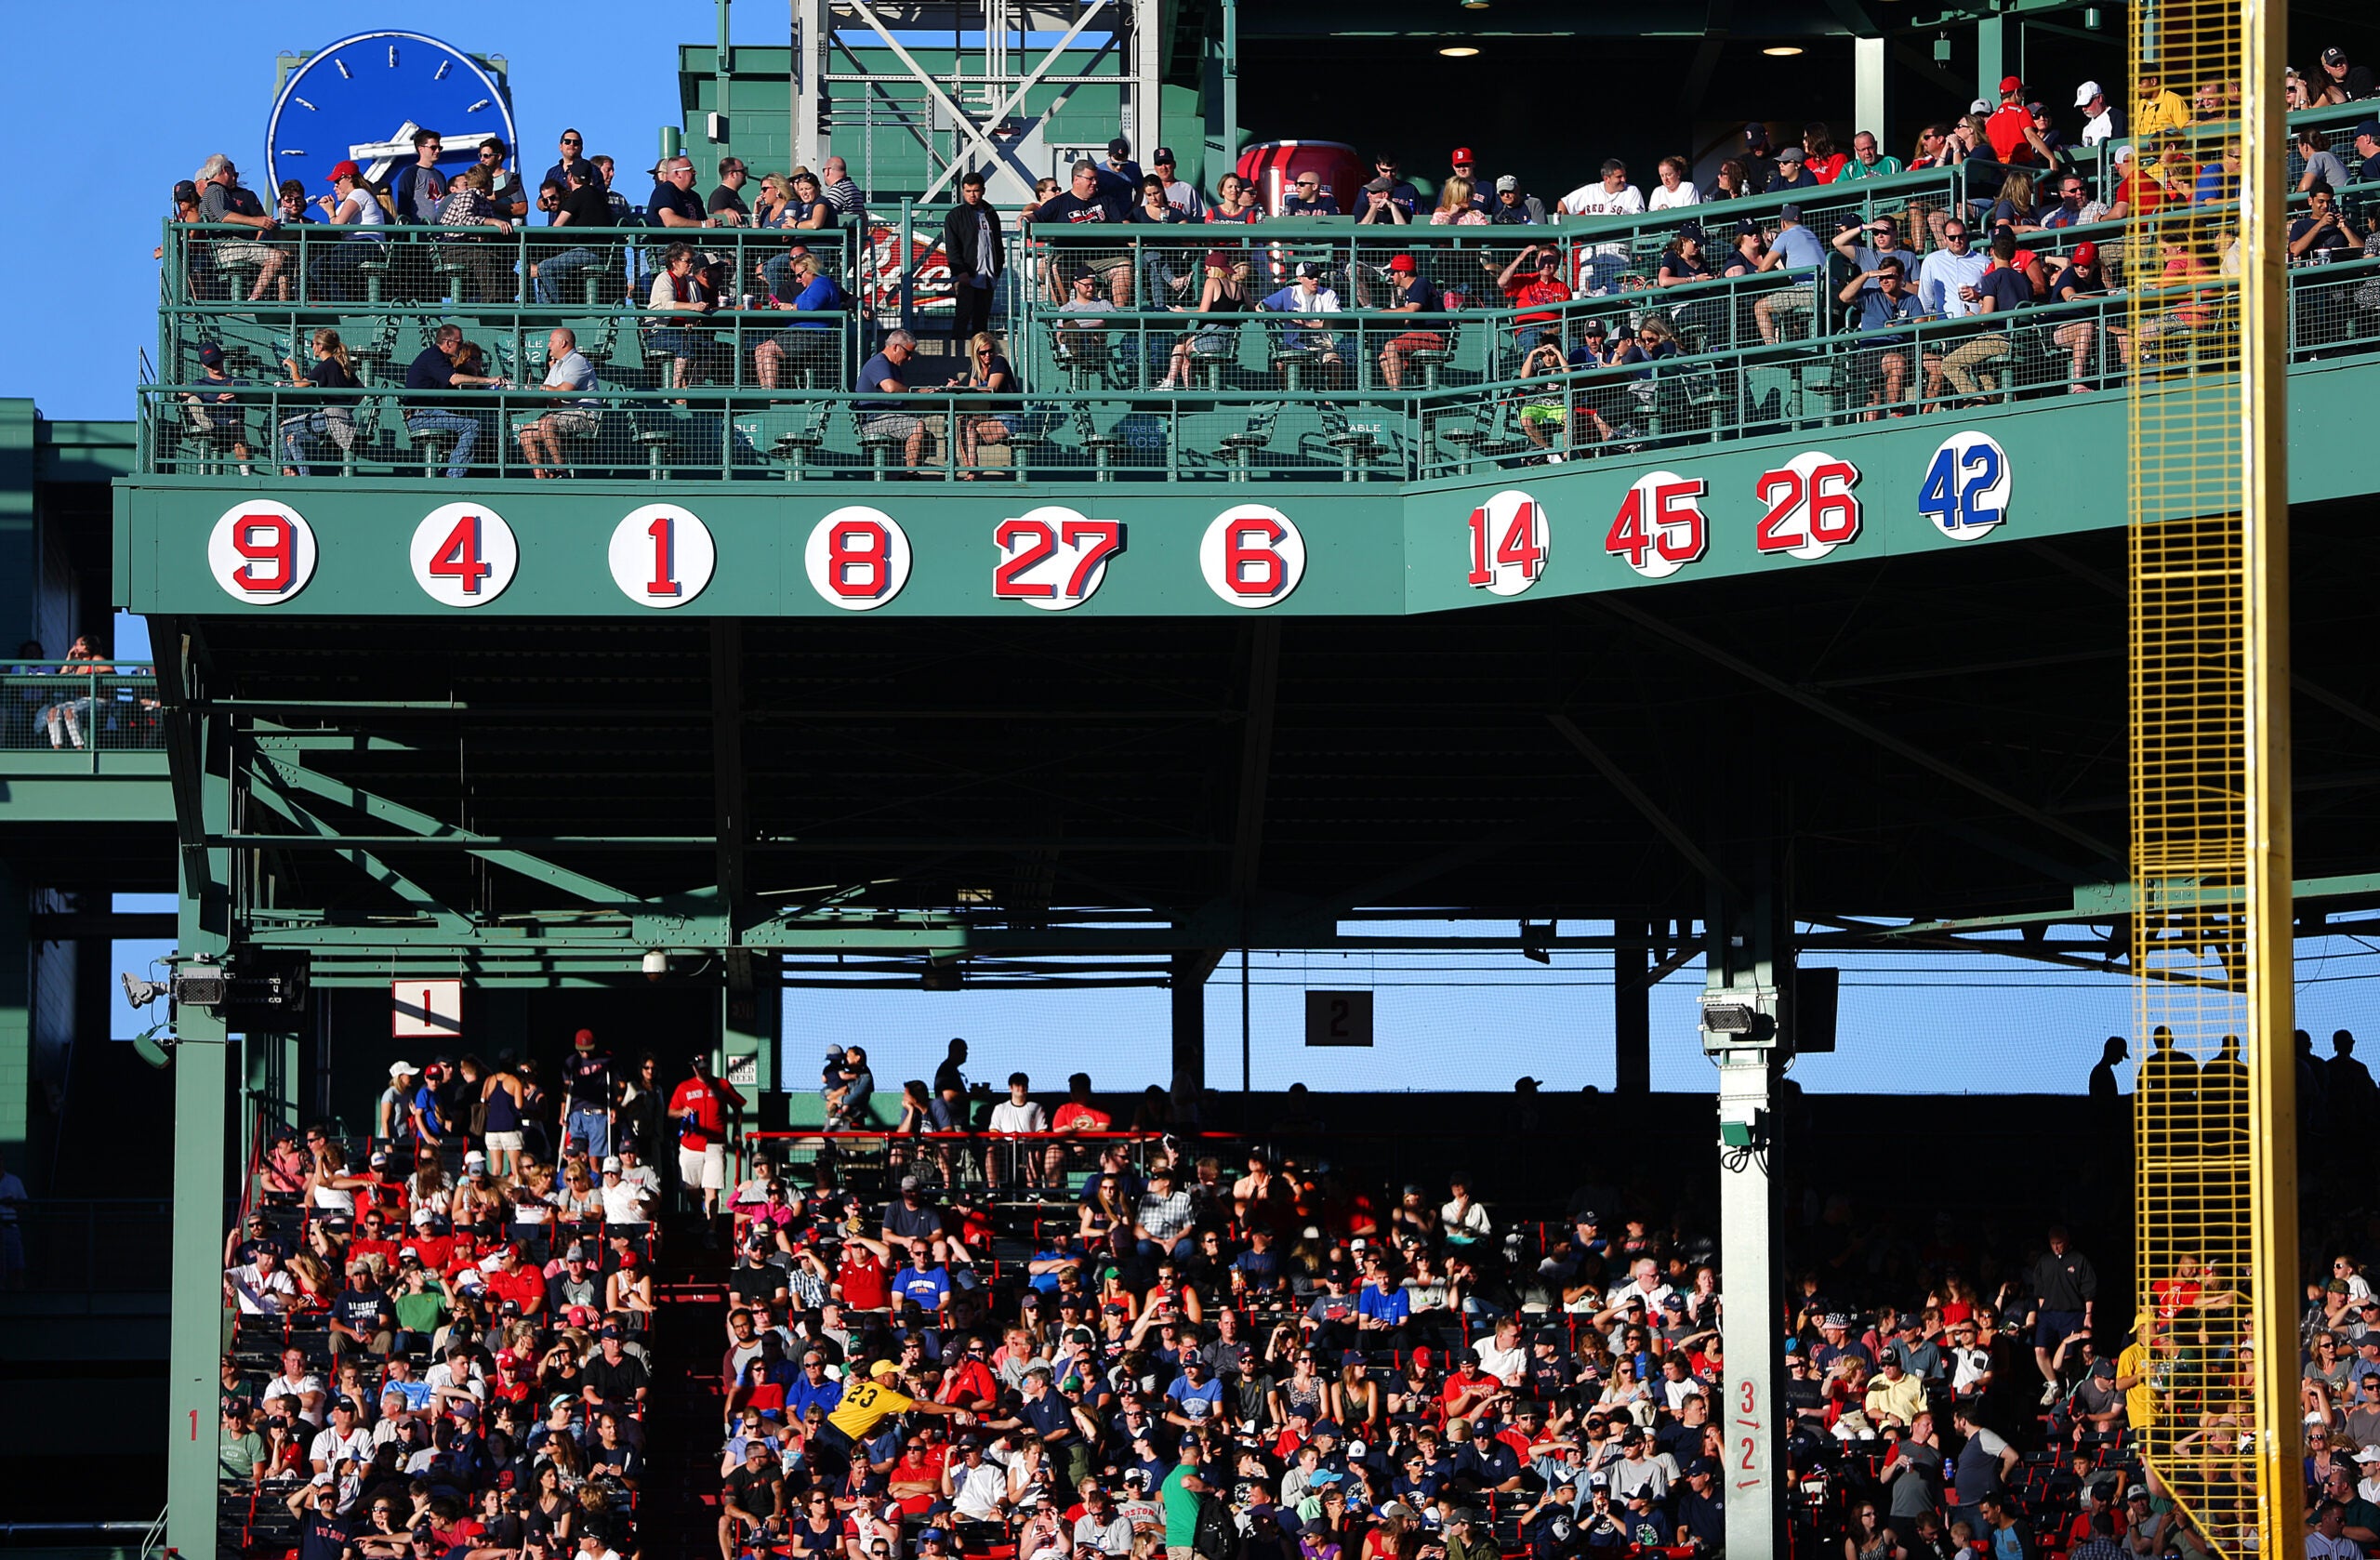 Mass Cash winning numbers match those retired by Red Sox